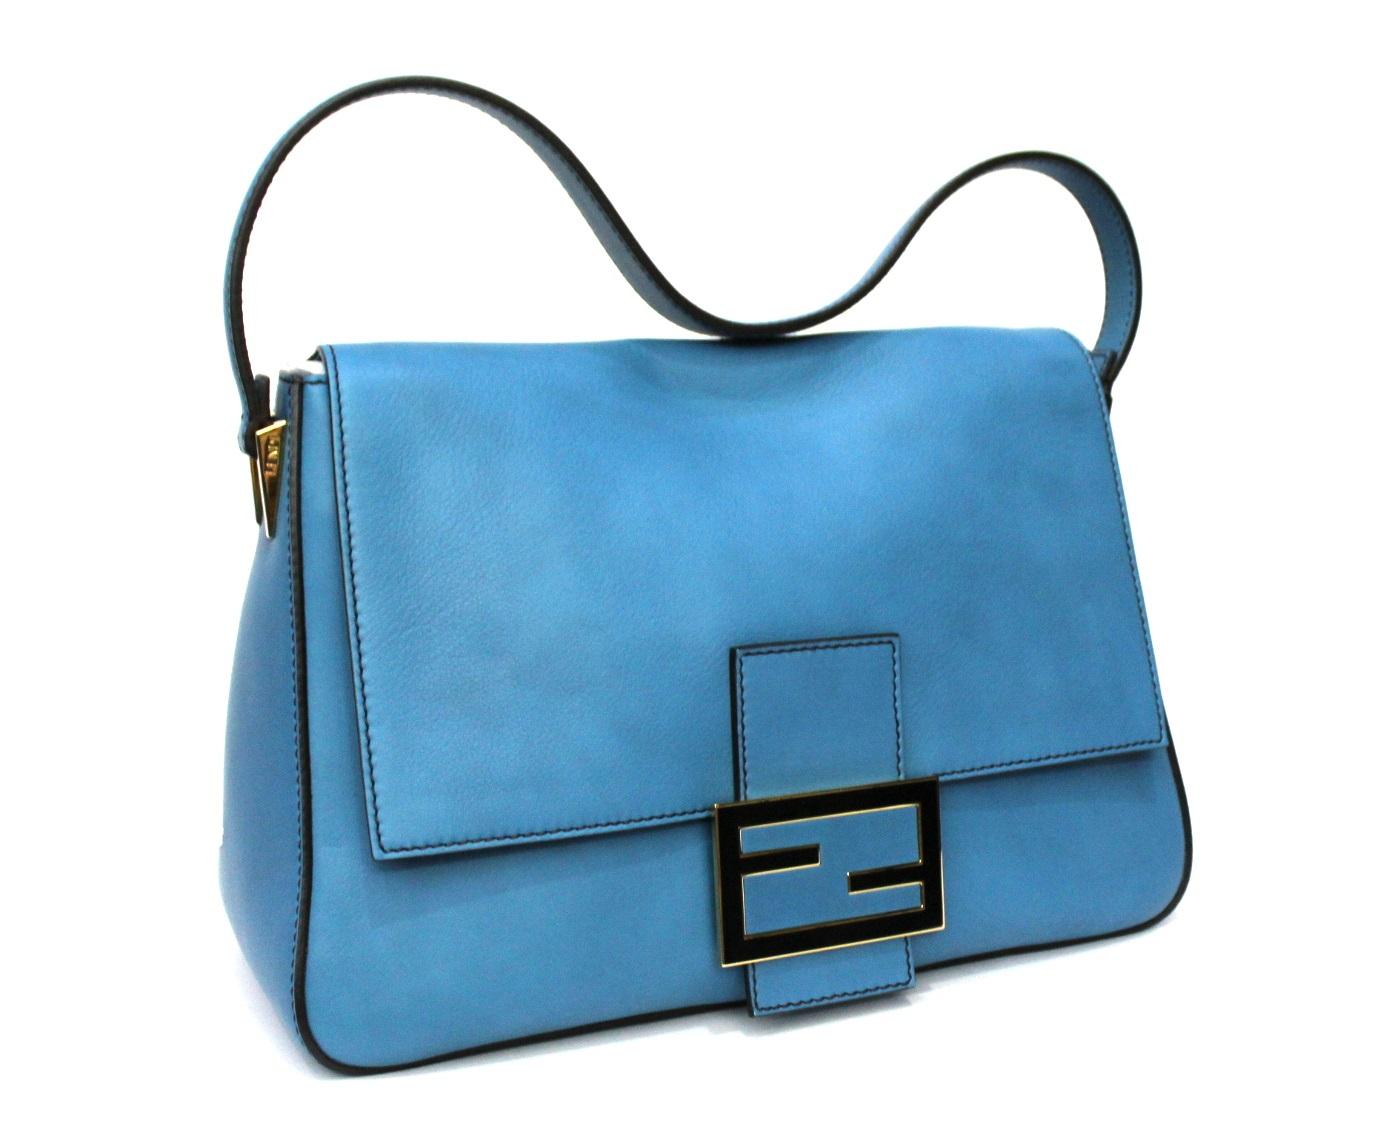 Fendi bag Mamma Baguette model made of blue leather with FF logo.
Magnetic button closure, internally quite large.
Equipped with leather handle to carry it comfortably on the shoulder.
Very good condition.